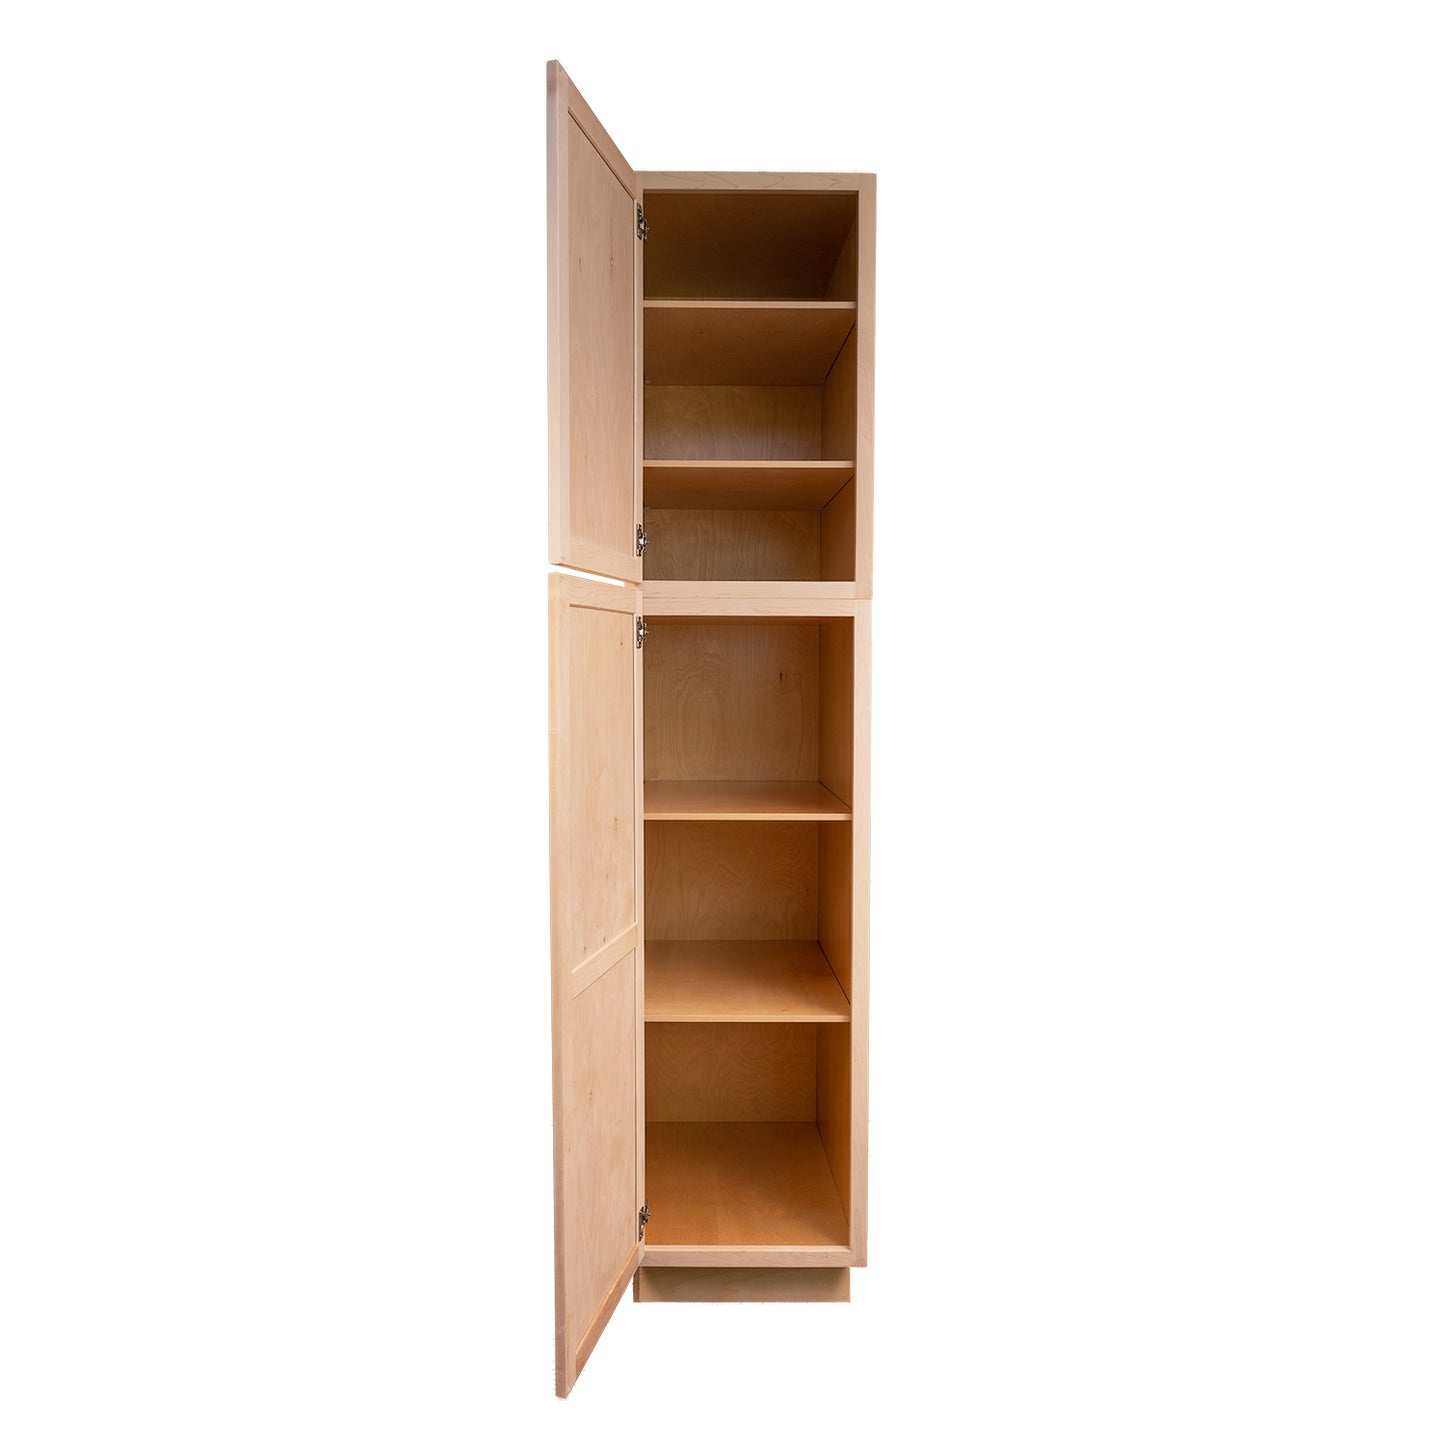 Quicklock RTA (Ready-to-Assemble) Raw Maple Pantry Cabinet 24"Wx84"Hx24"D